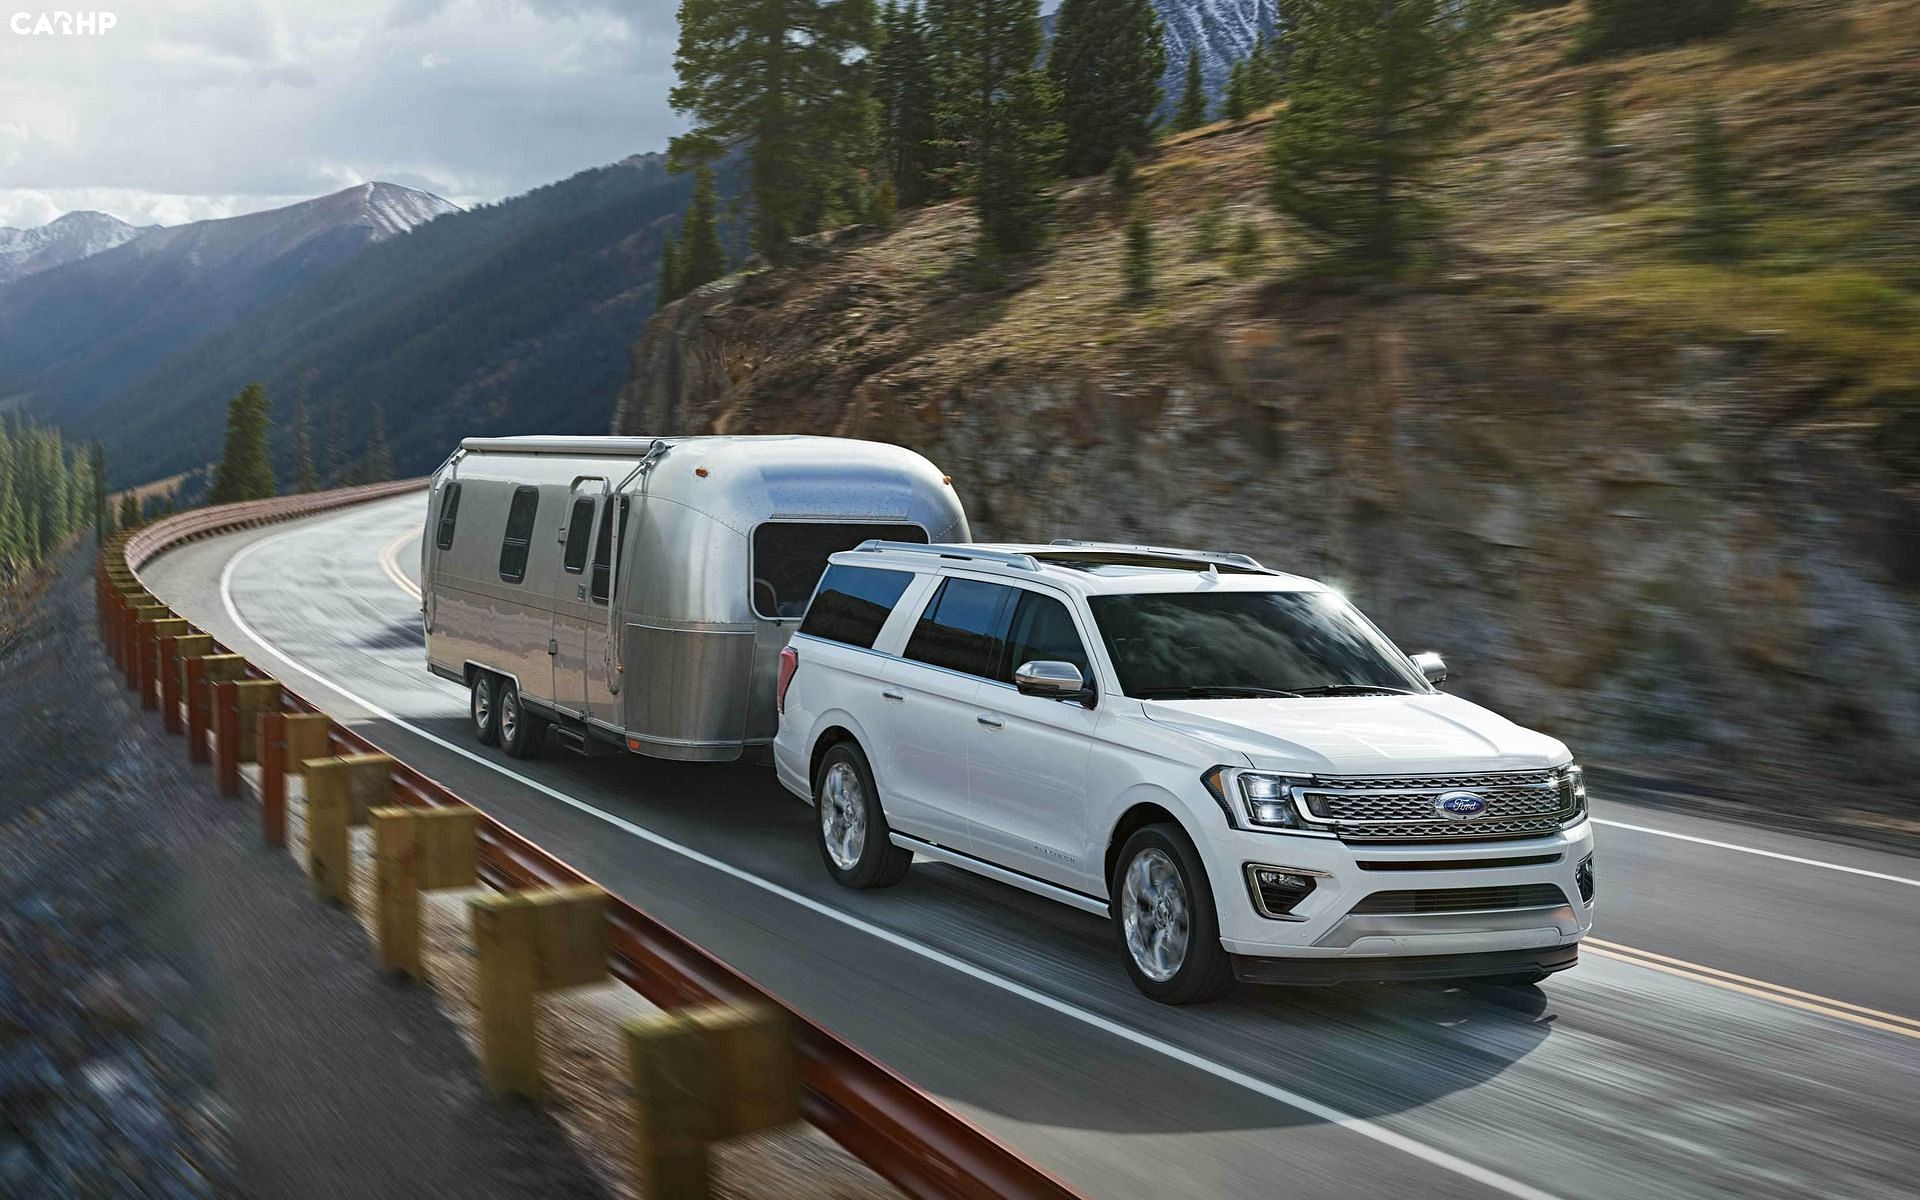 2021 Ford Expedition Towing Capacity CARHP